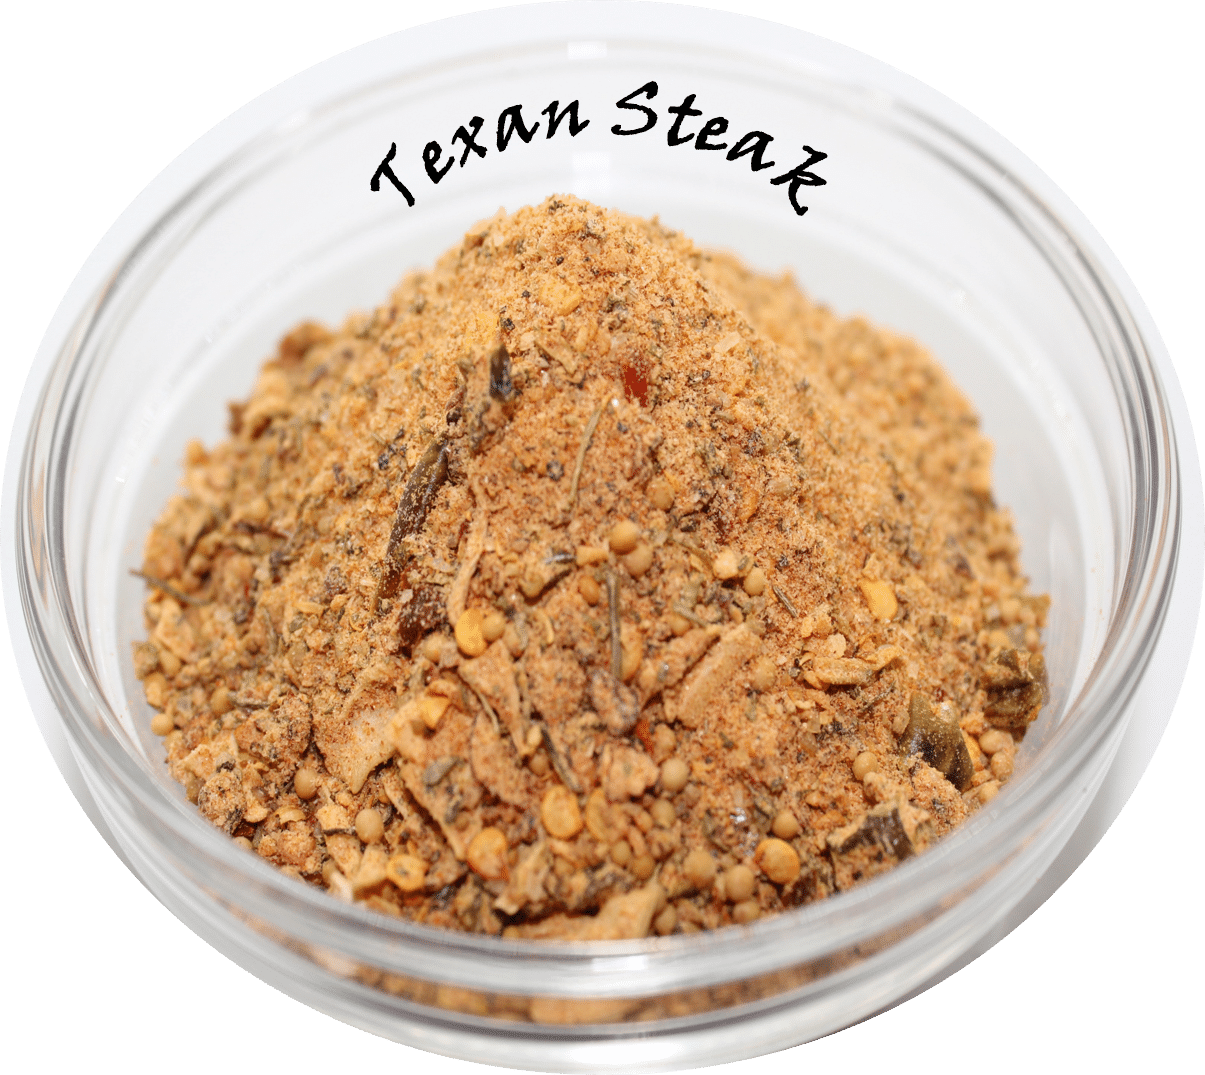 Texan Steak no logo <strong><u>Description: </u></strong> •Legendary steak seasoning with a sweet and slightly aromatic flavour. •Perfect for steaks and meat on the grill!